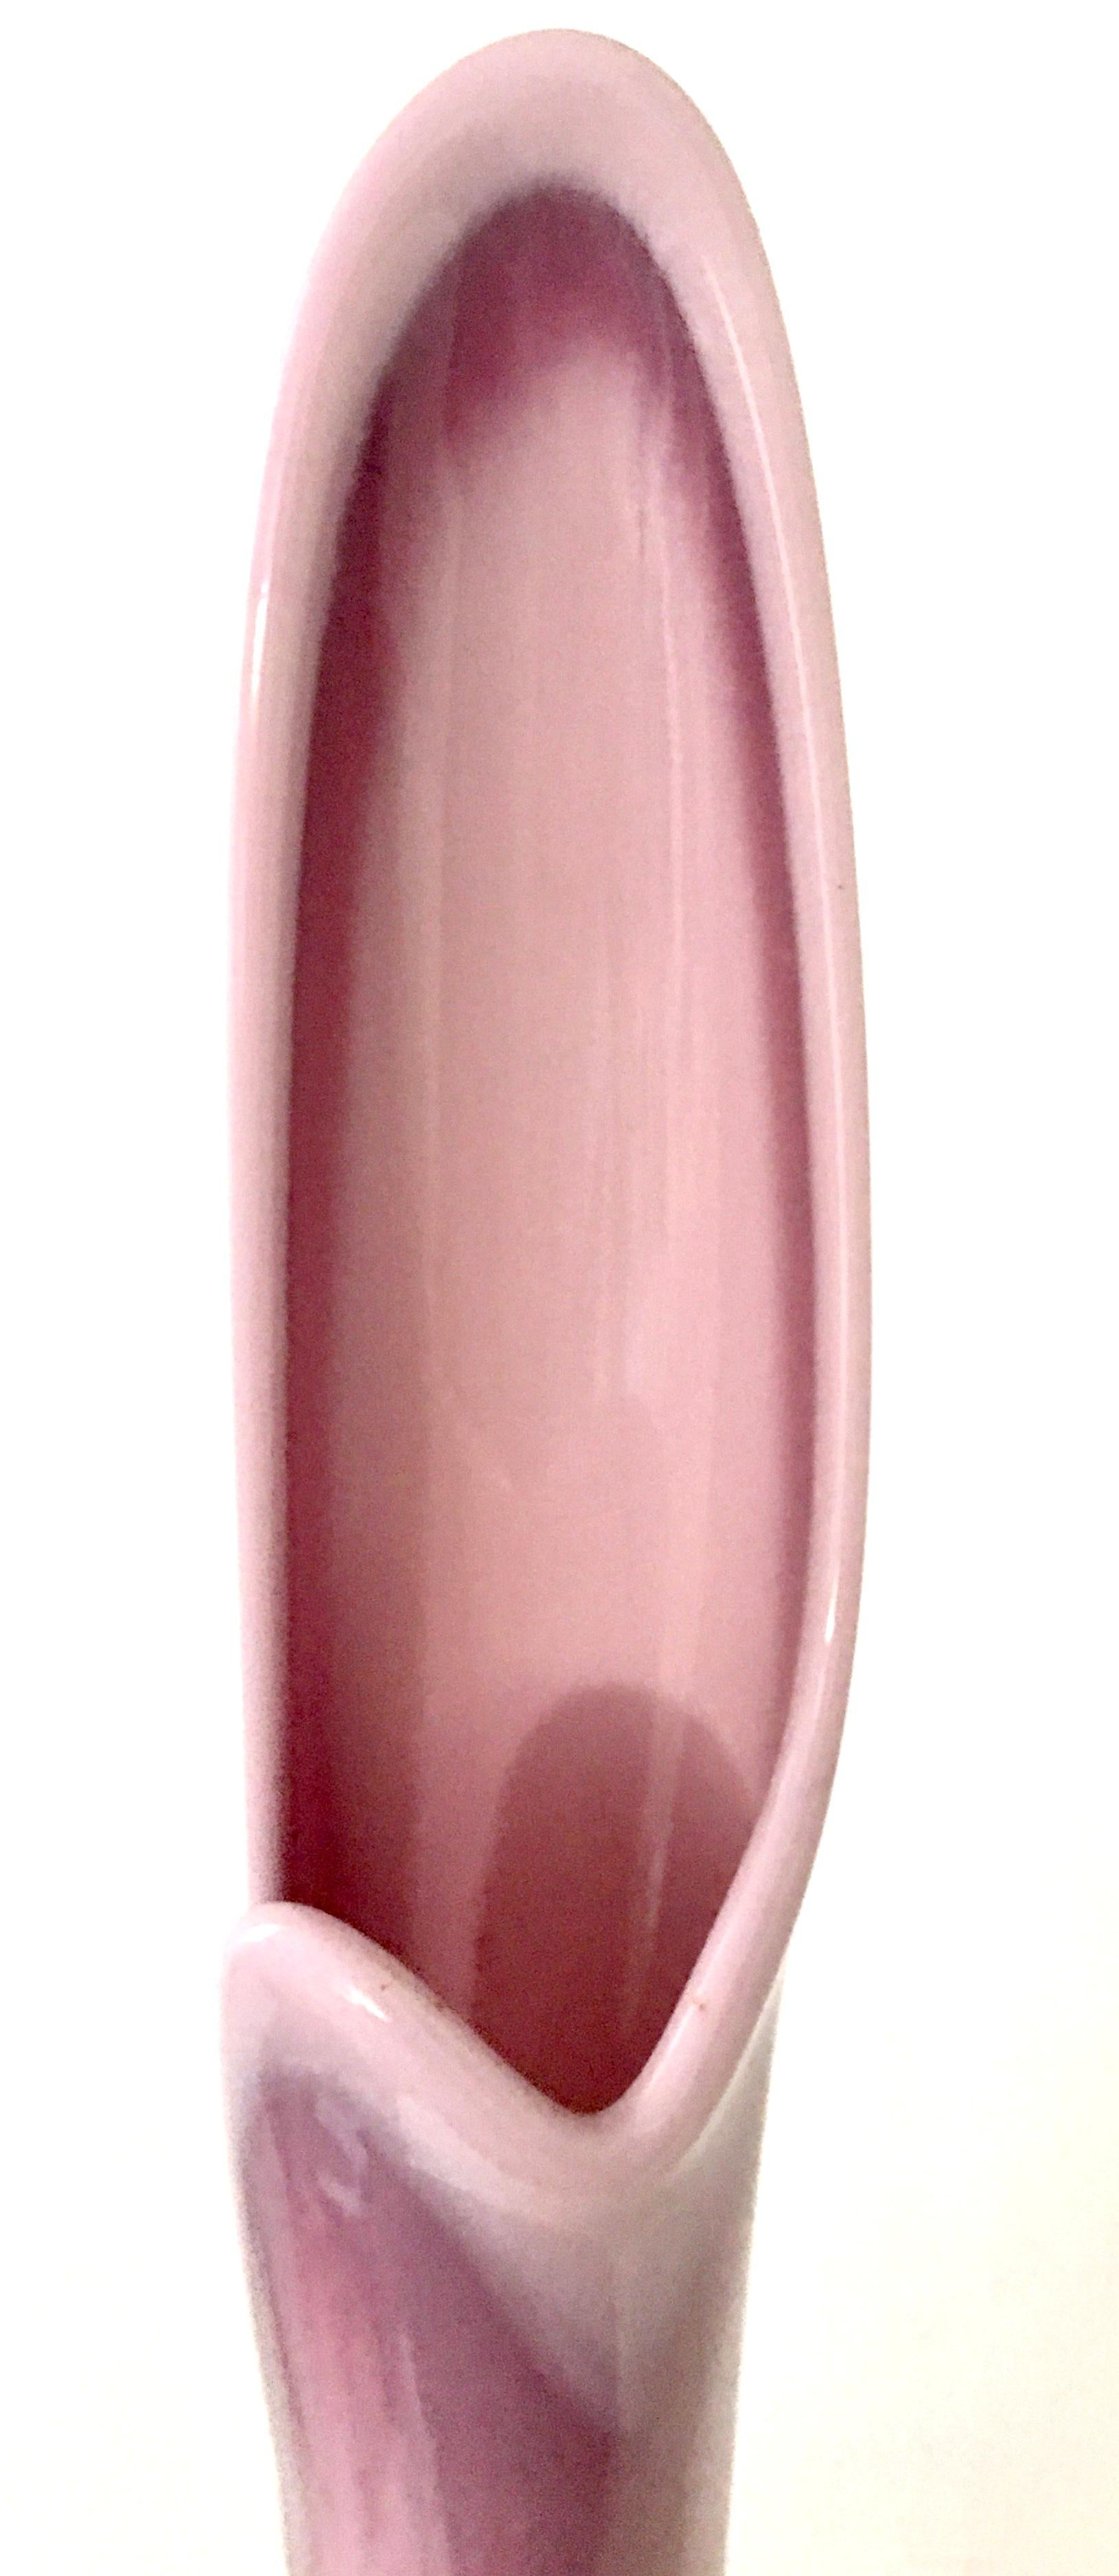 American Mid-Century Modern Tall Opaque Lavender Slag Glass Vase by L.E. Smith Glass Co.